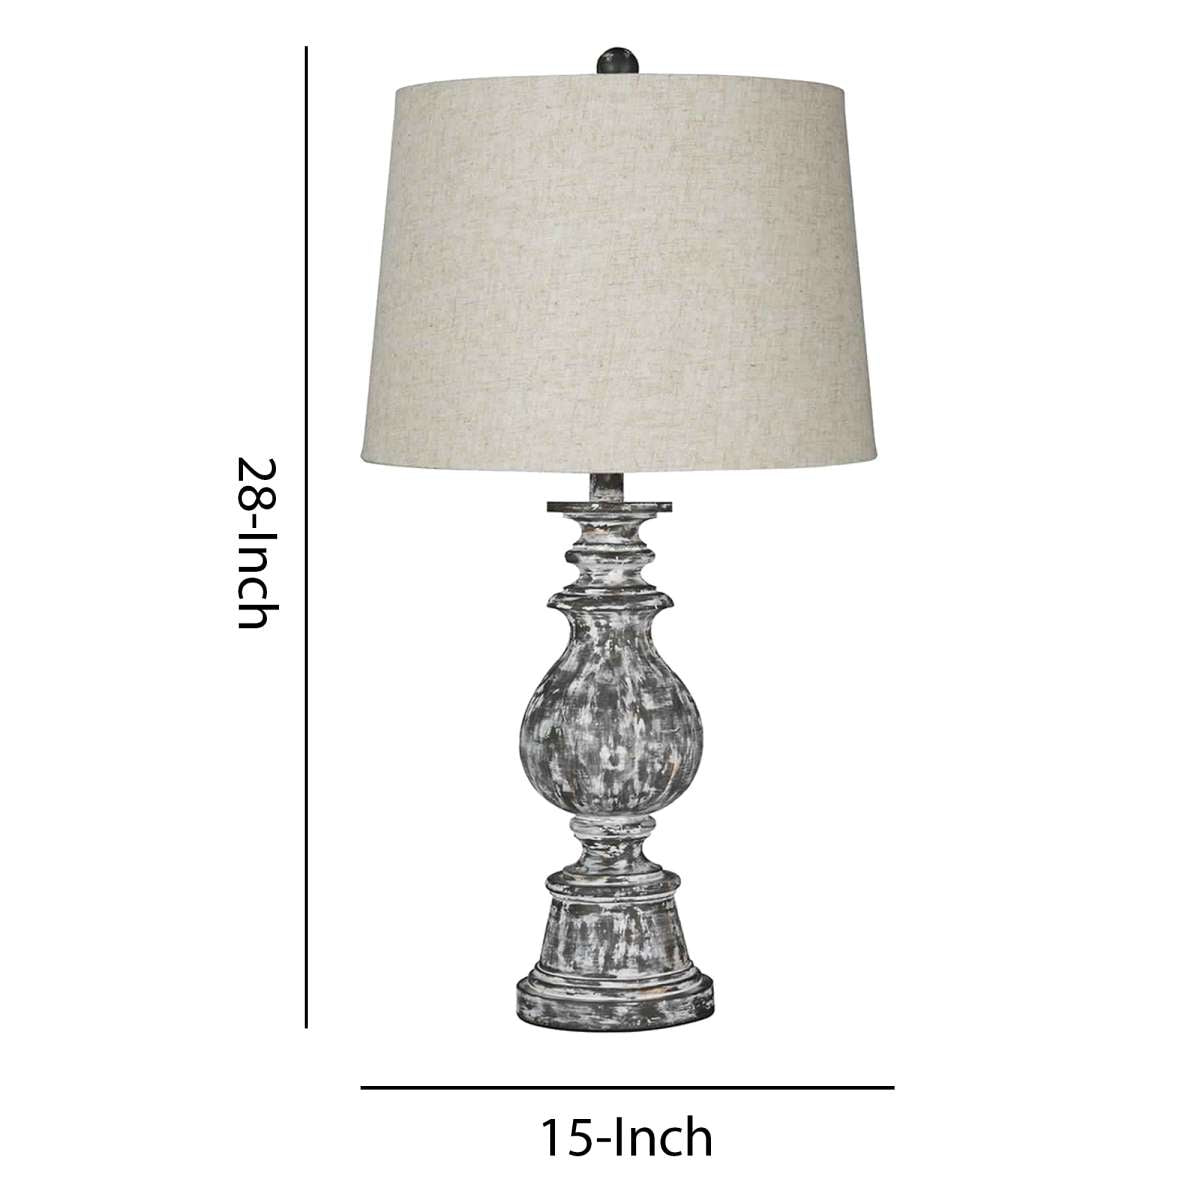 Pedestal Body Faux Wood Table Lamp With Tapered Fabric Shade,Set Of 2,Gray By Benzara